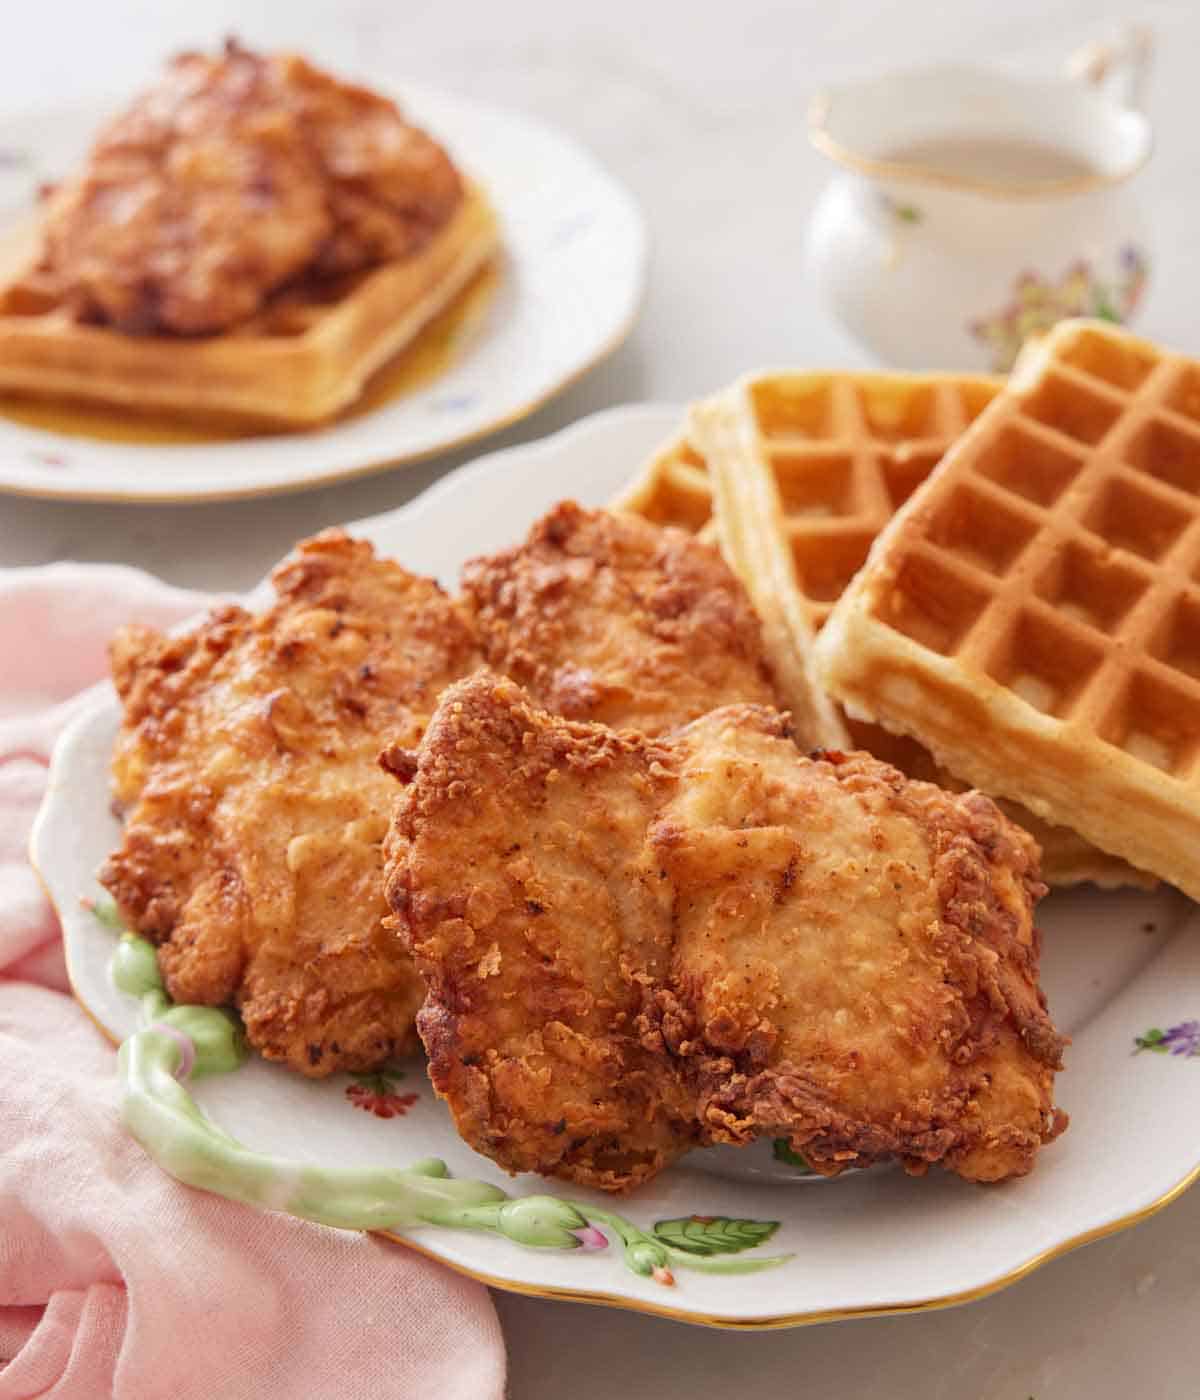 A platter with a pile of waffles on the back half and fried chicken in the front.